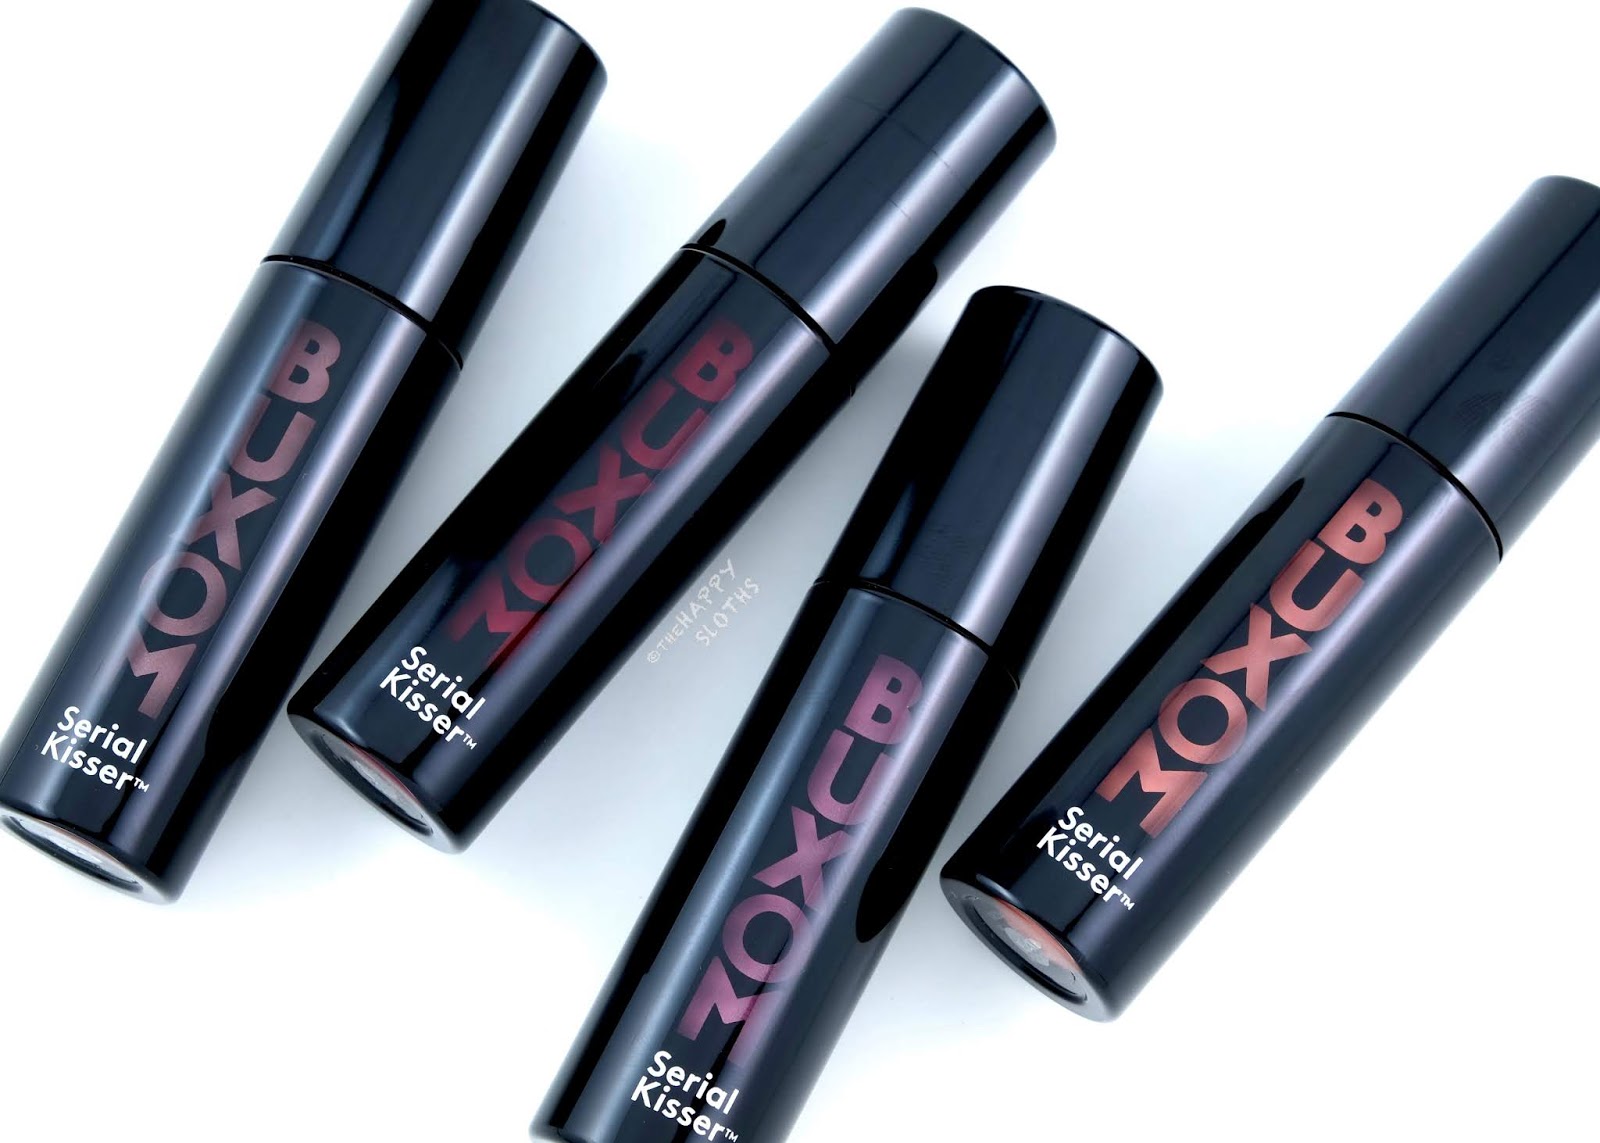 Buxom | Serial Kisser Plumping Lip Stain: Review and Swatches